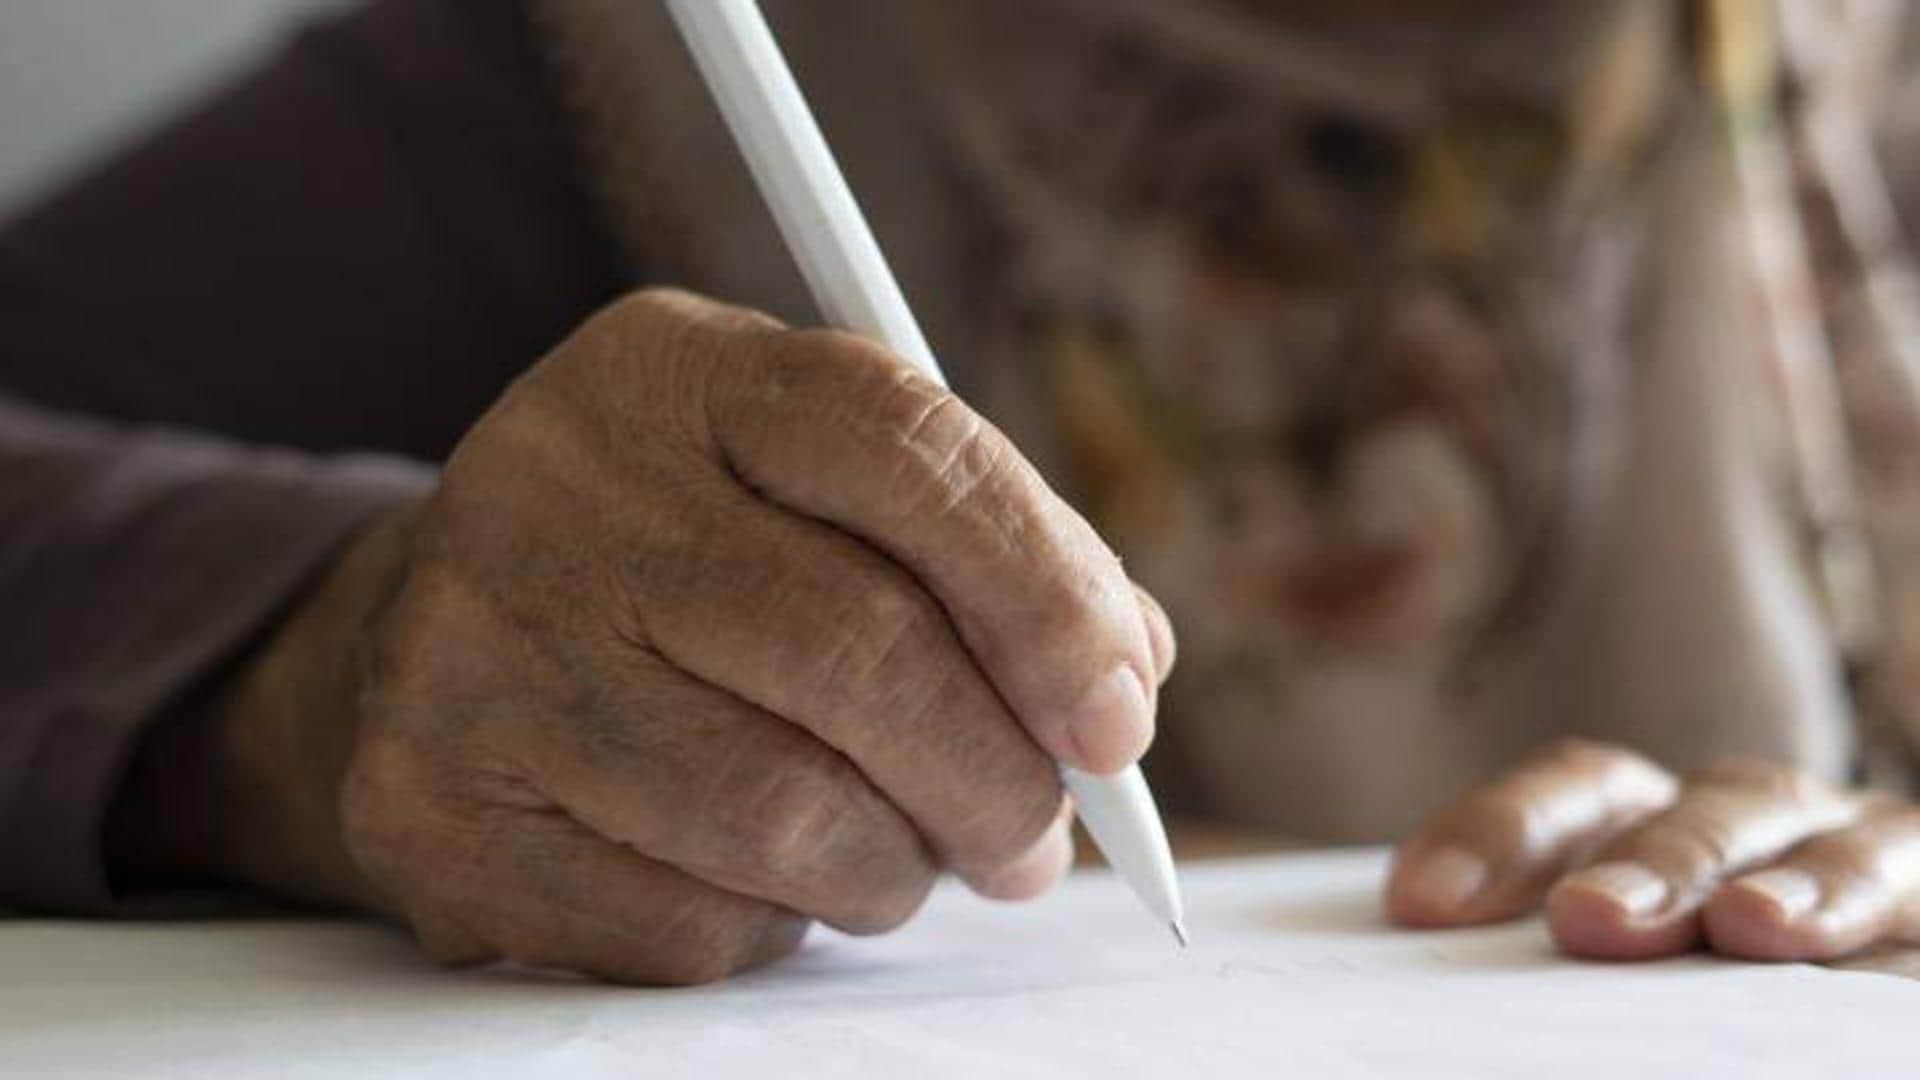 An 80-year-old student collects signatures so that the UNED does not fire his teacher